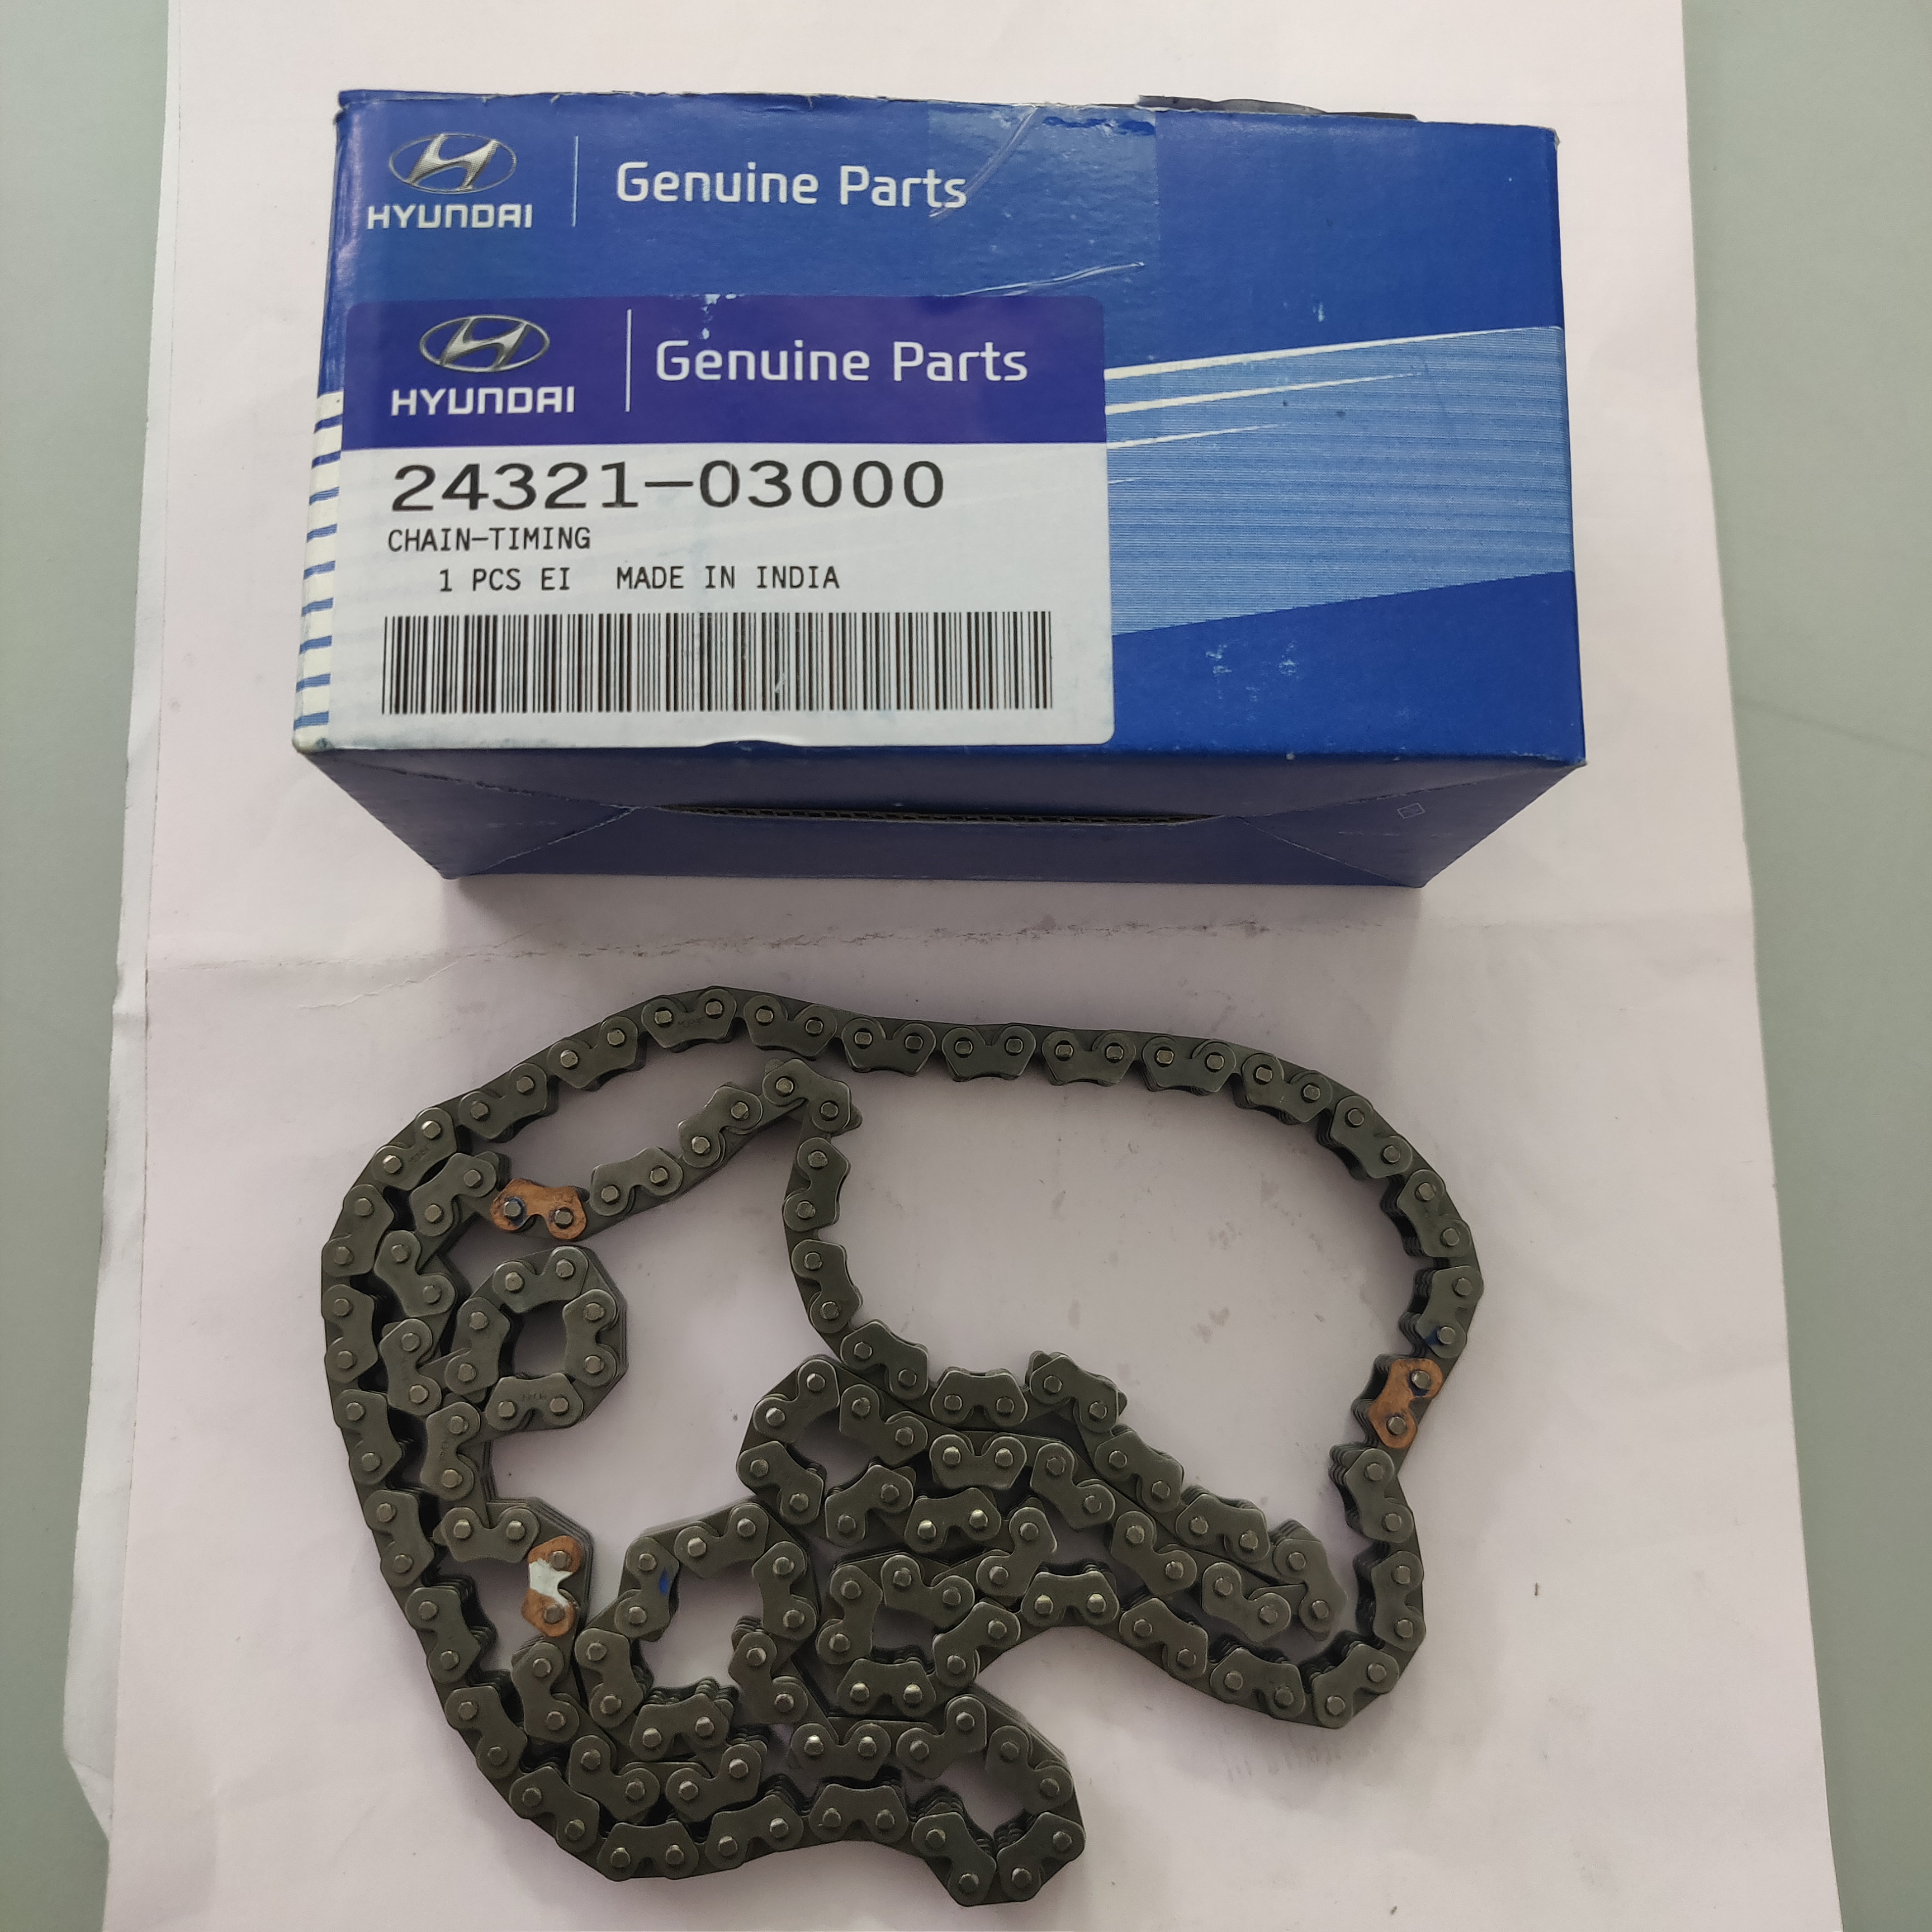 HYUNDAI I 20 CHAIN TIMING ALSO I10 FIRST GEN 2432103000 STOCKID 1008